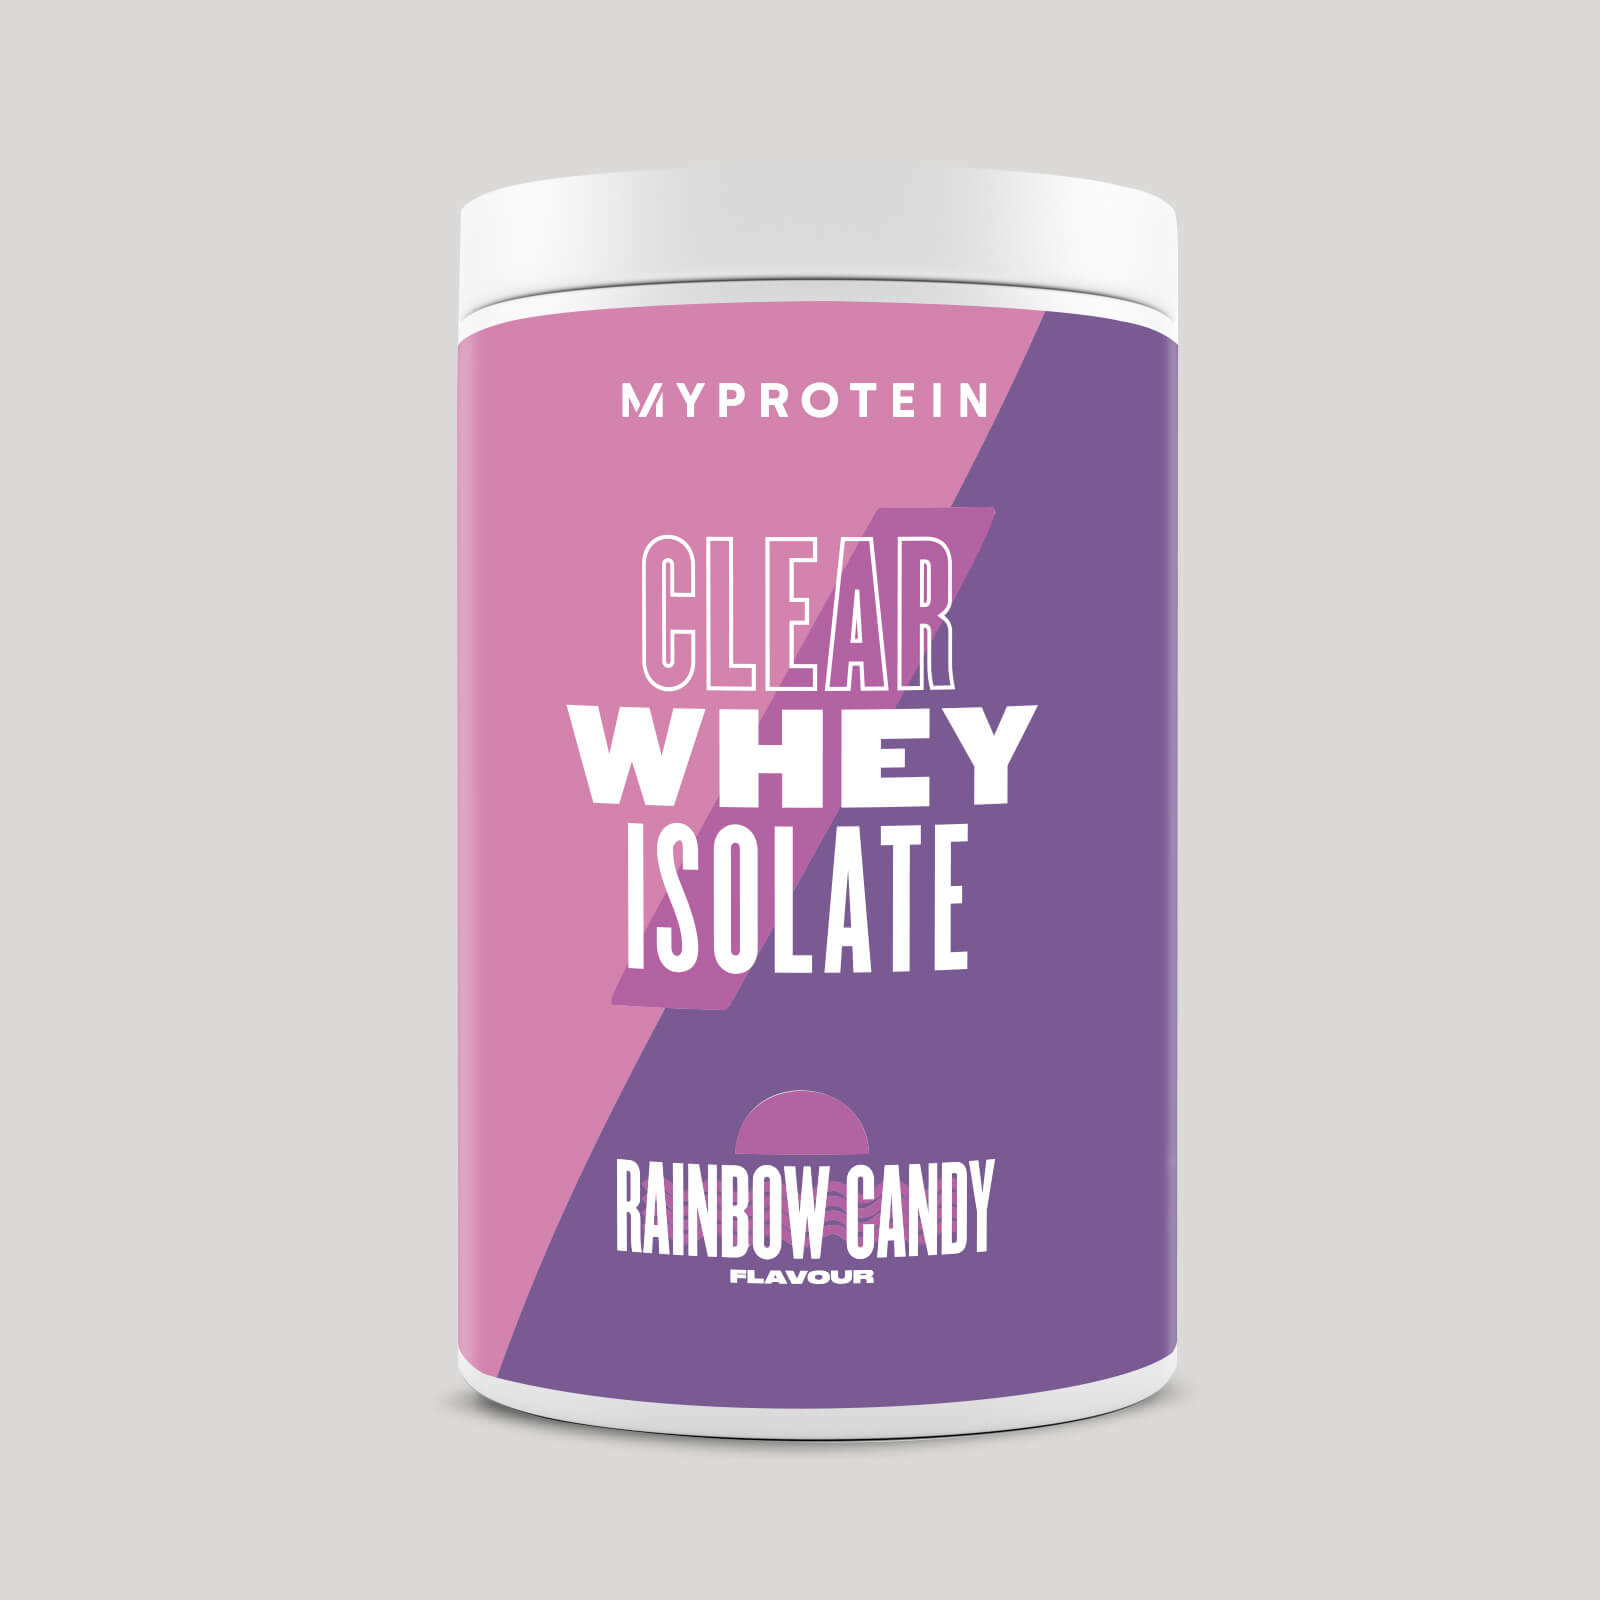 MyProtein Clear Whey Review - Rainbow Candy